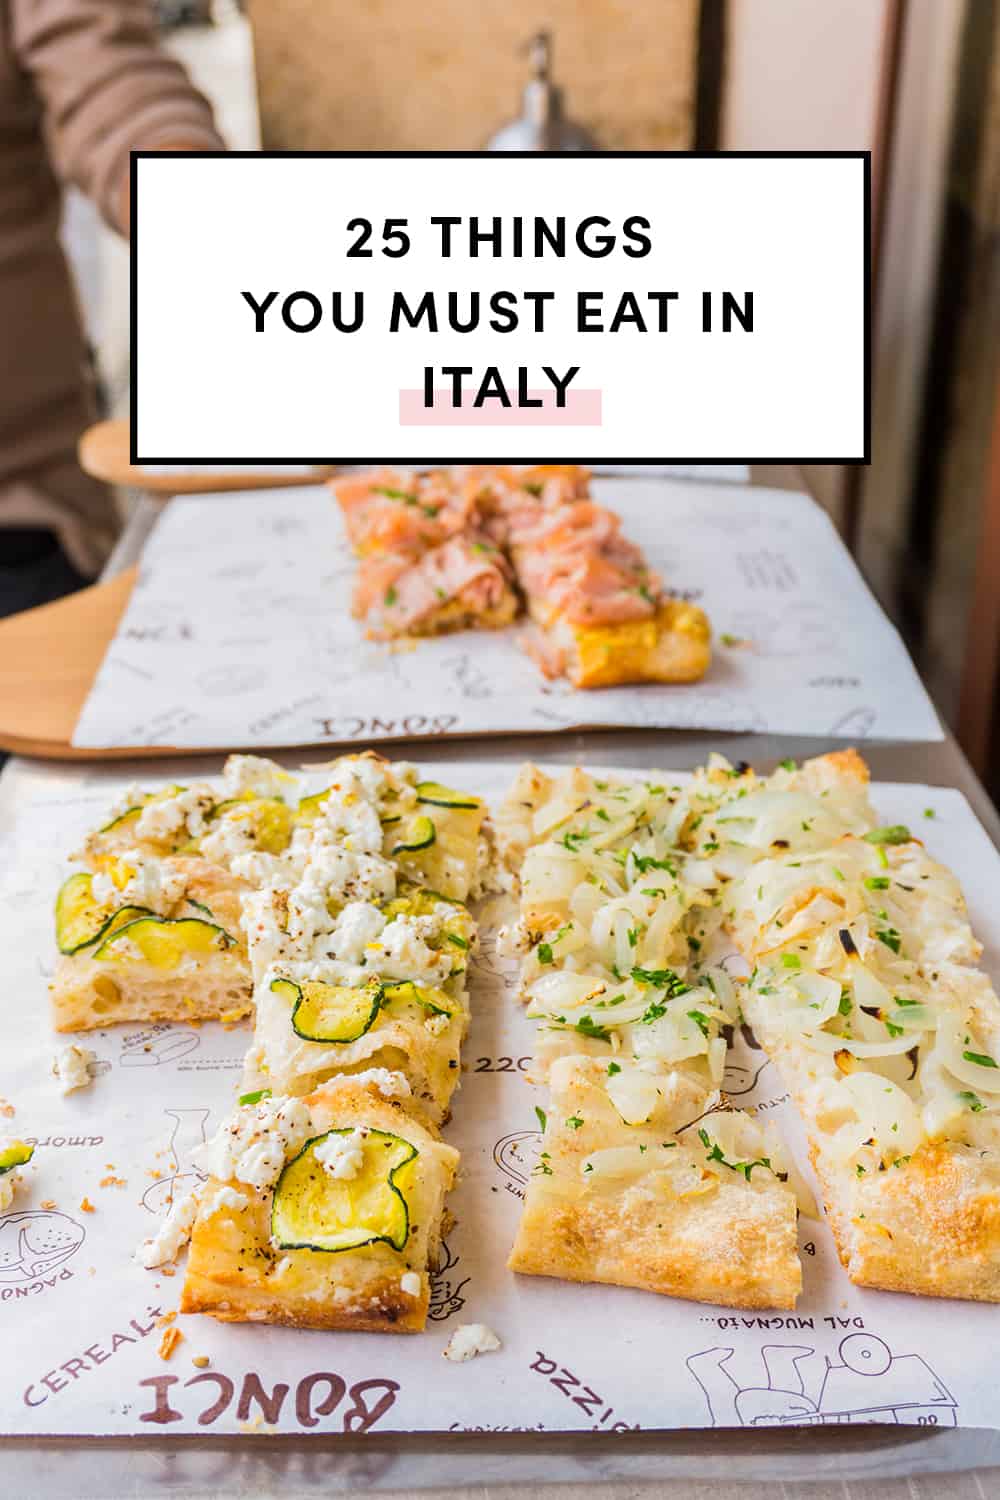 25 Things You Must Eat In Italy